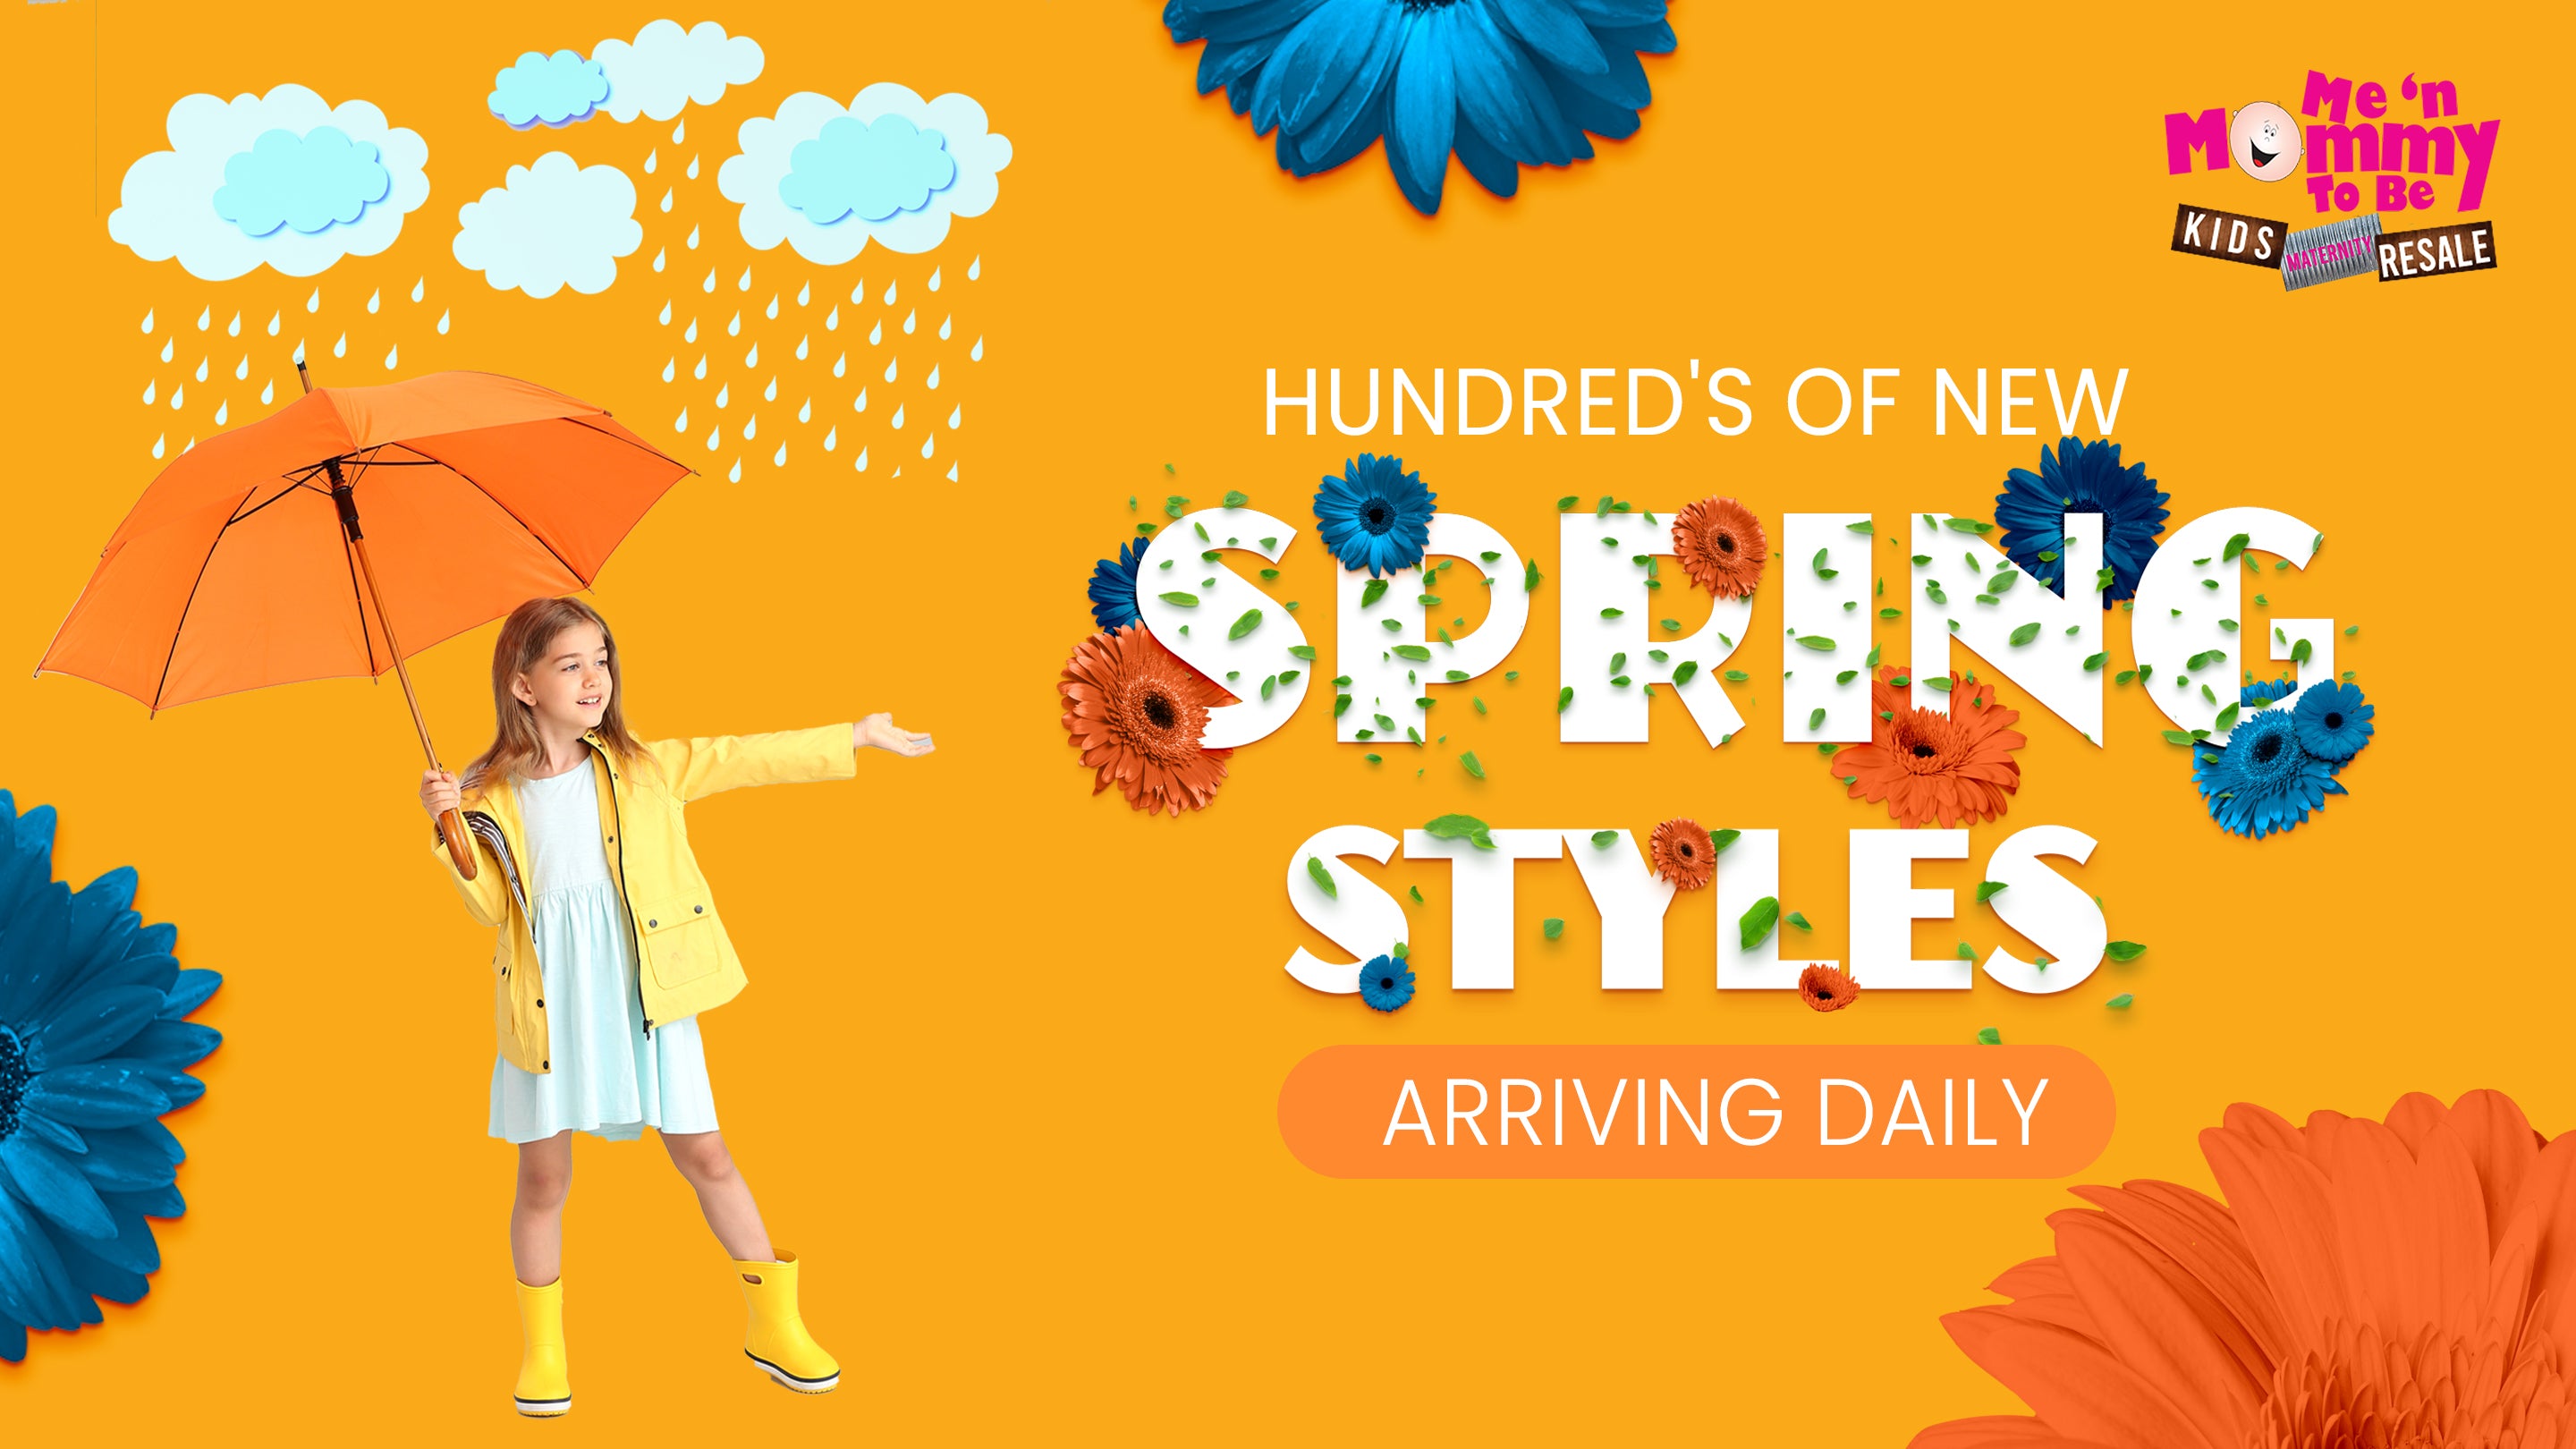 Kids spring styles of today's most popular brands on sale with thousands of new arrivals daily